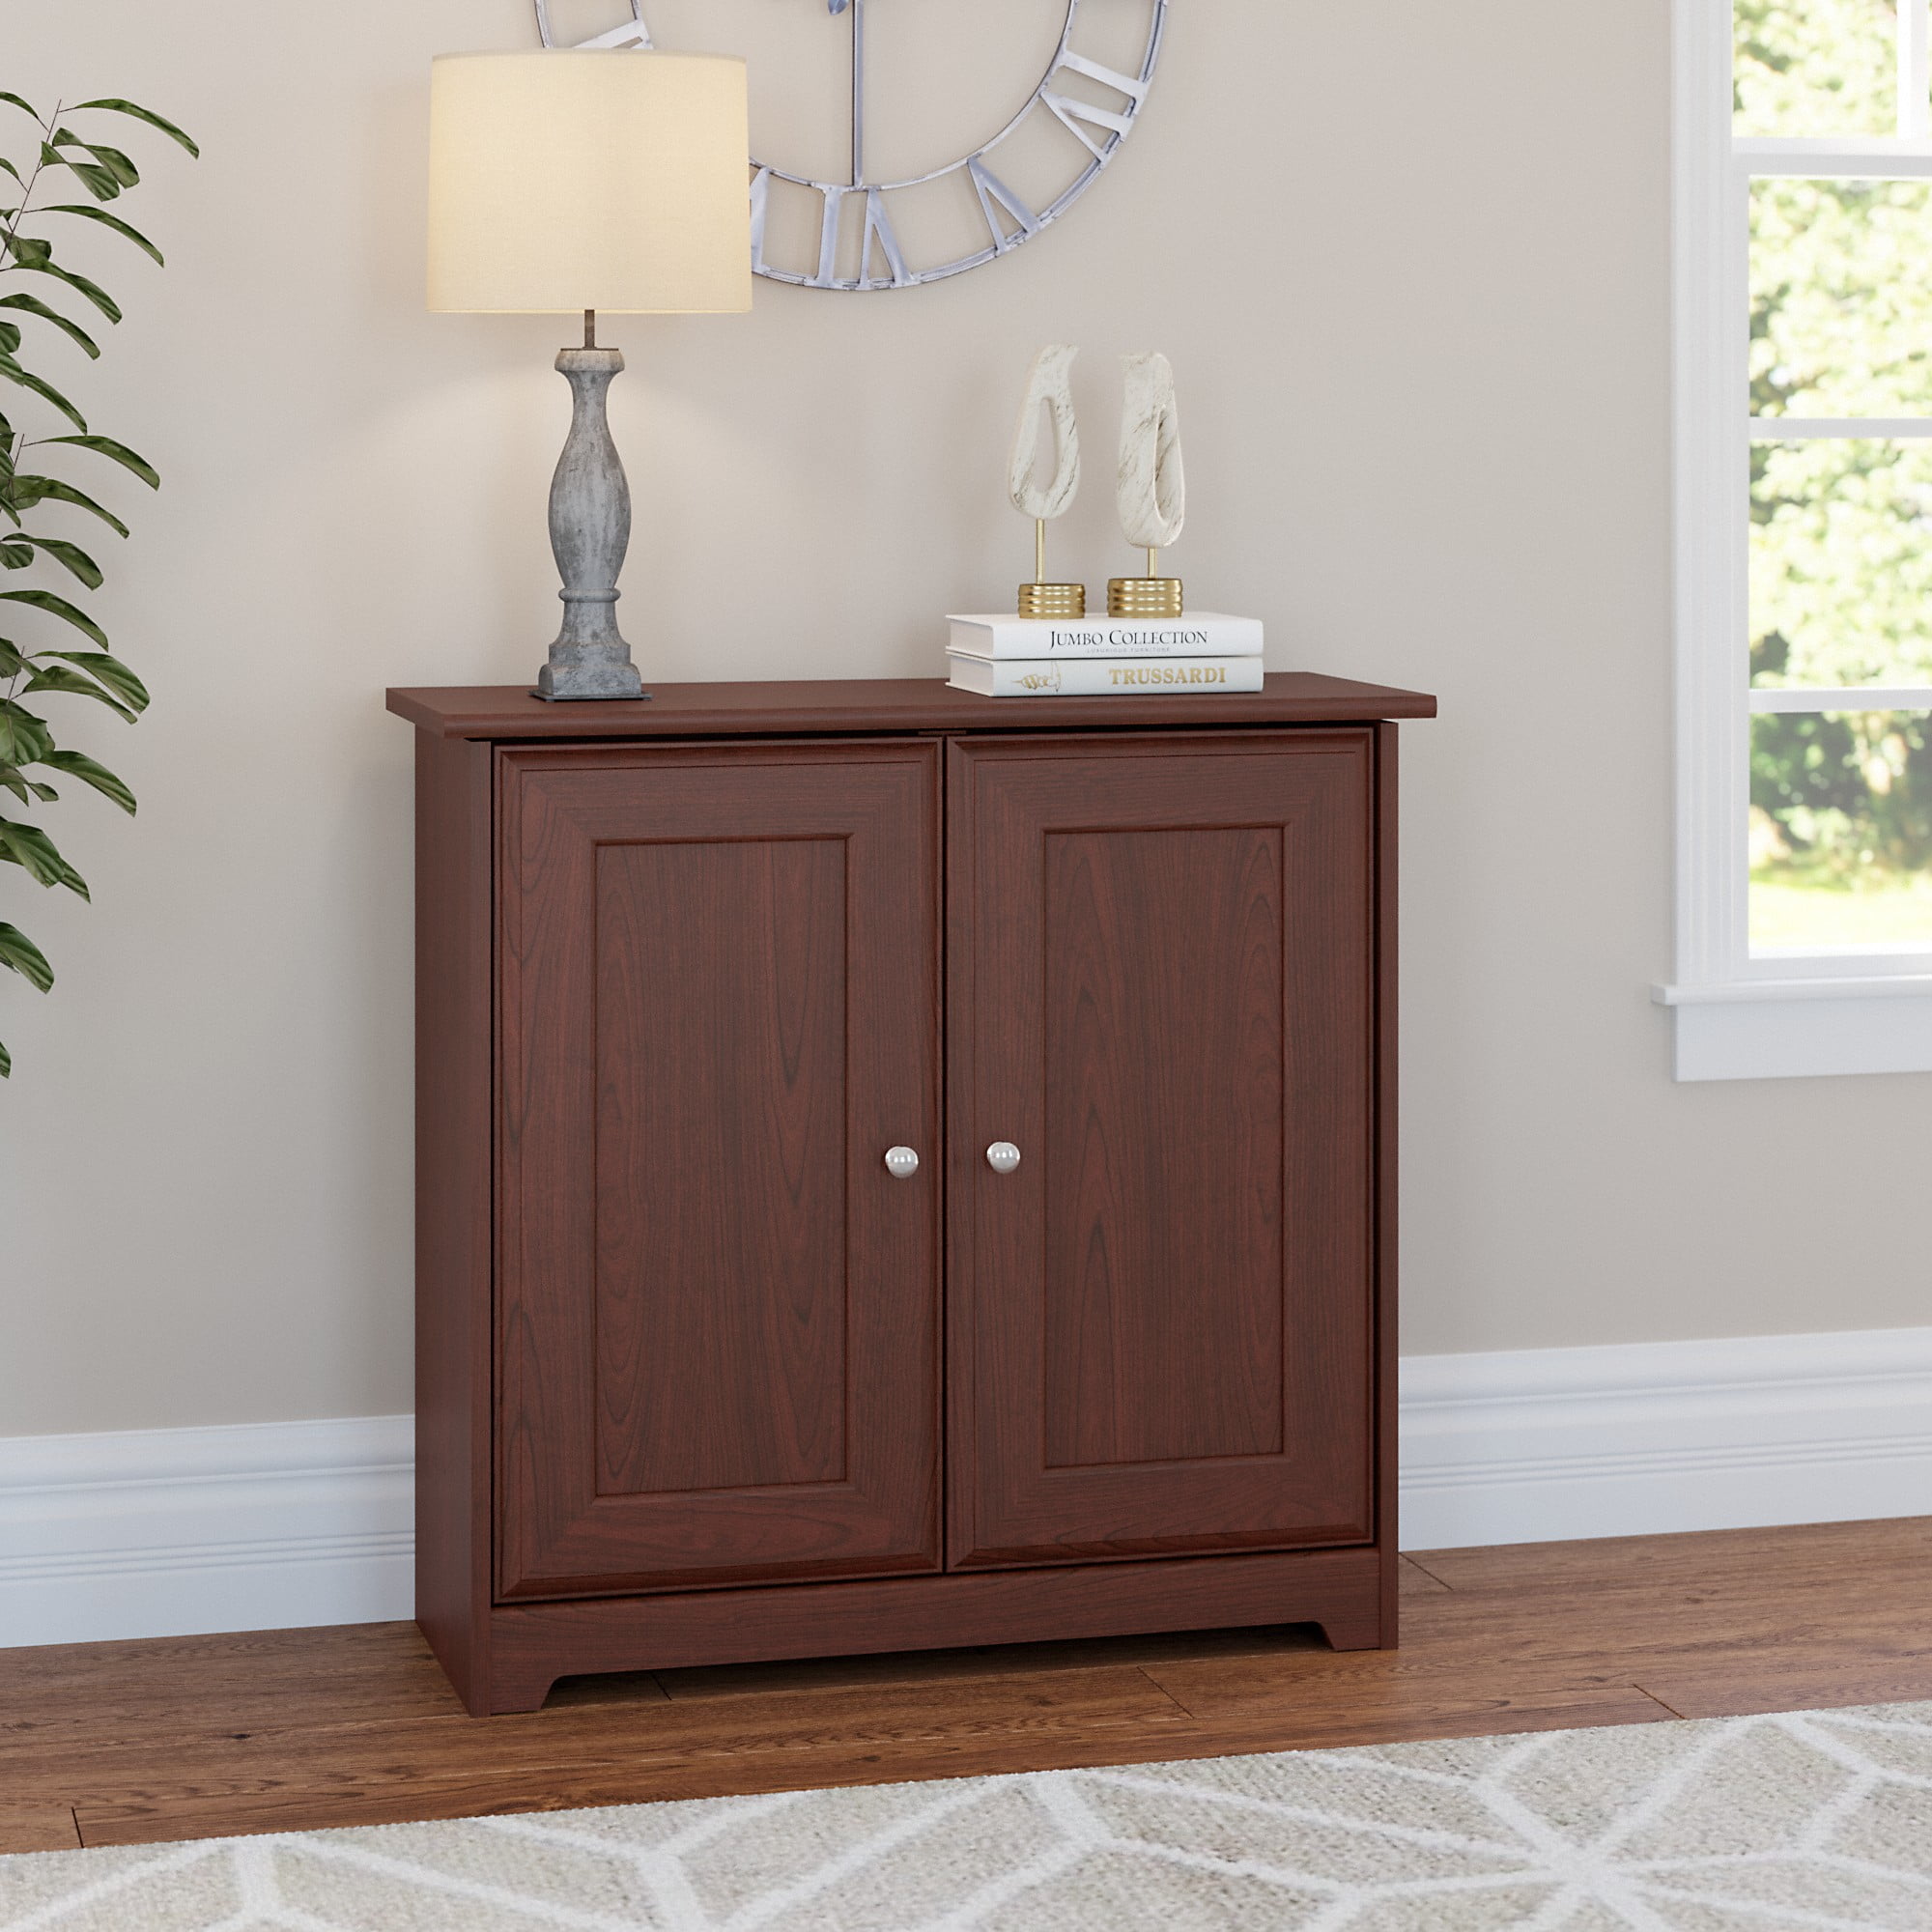 Bush Furniture Cabot Small Storage Cabinet with Doors in Harvest Cherry -  Walmart.com